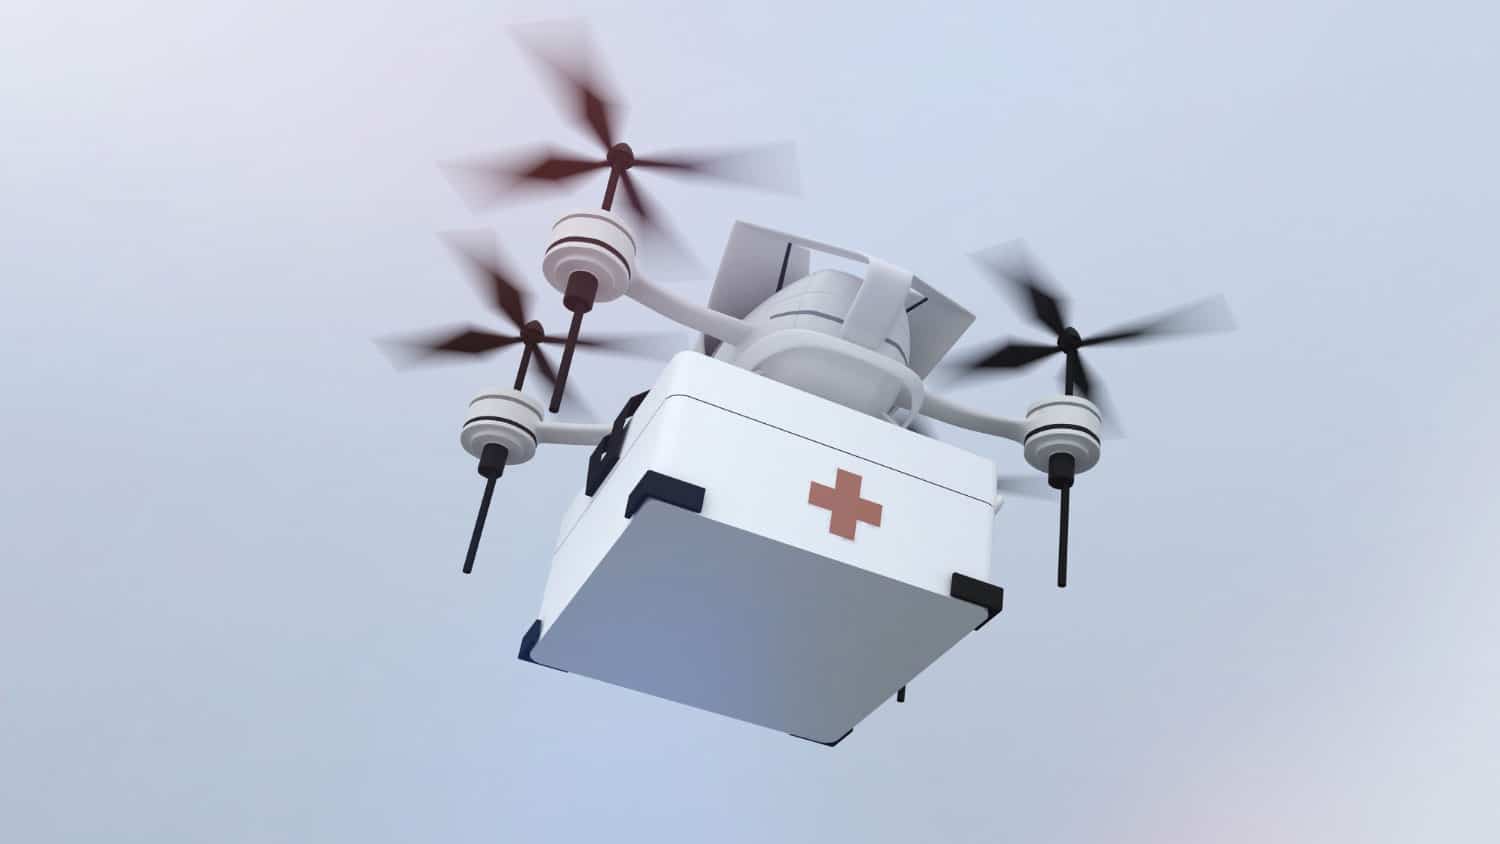 Drone-delivered defibrillator can save people from sudden cardiac arrest